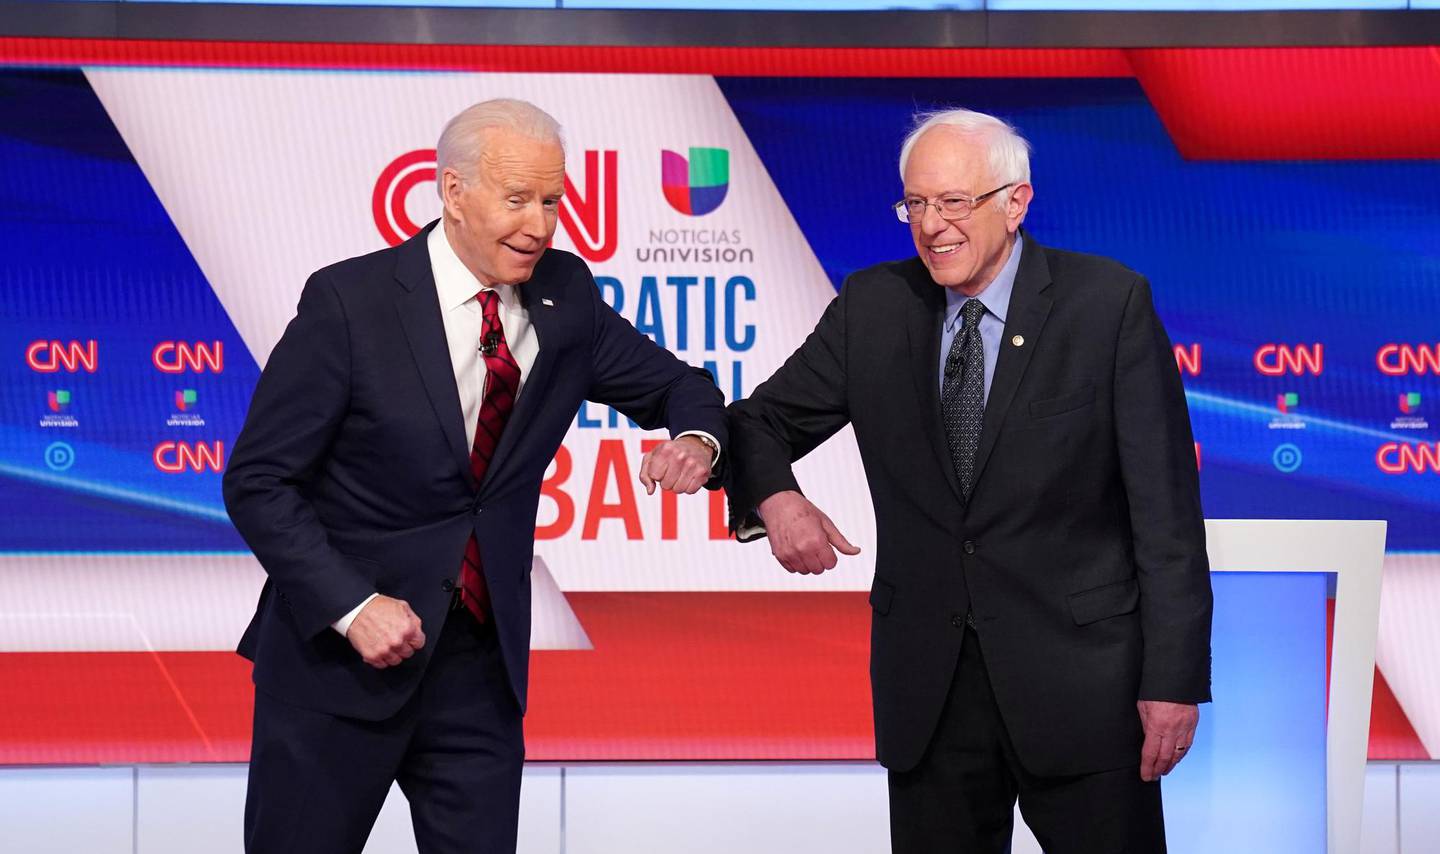 Democratic U.S. presidential candidates former Vice President Joe Biden and Senator Bernie Sanders do an elbow bump in place of a handshake as they greet other before the start of the 11th Democratic candidates debate of the 2020 U.S. presidential campaign, held in CNN's Washington studios without an audience because of the global coronavirus pandemic, in Washington, U.S. March 15, 2020. REUTERS/Kevin Lamarque     TPX IMAGES OF THE DAY